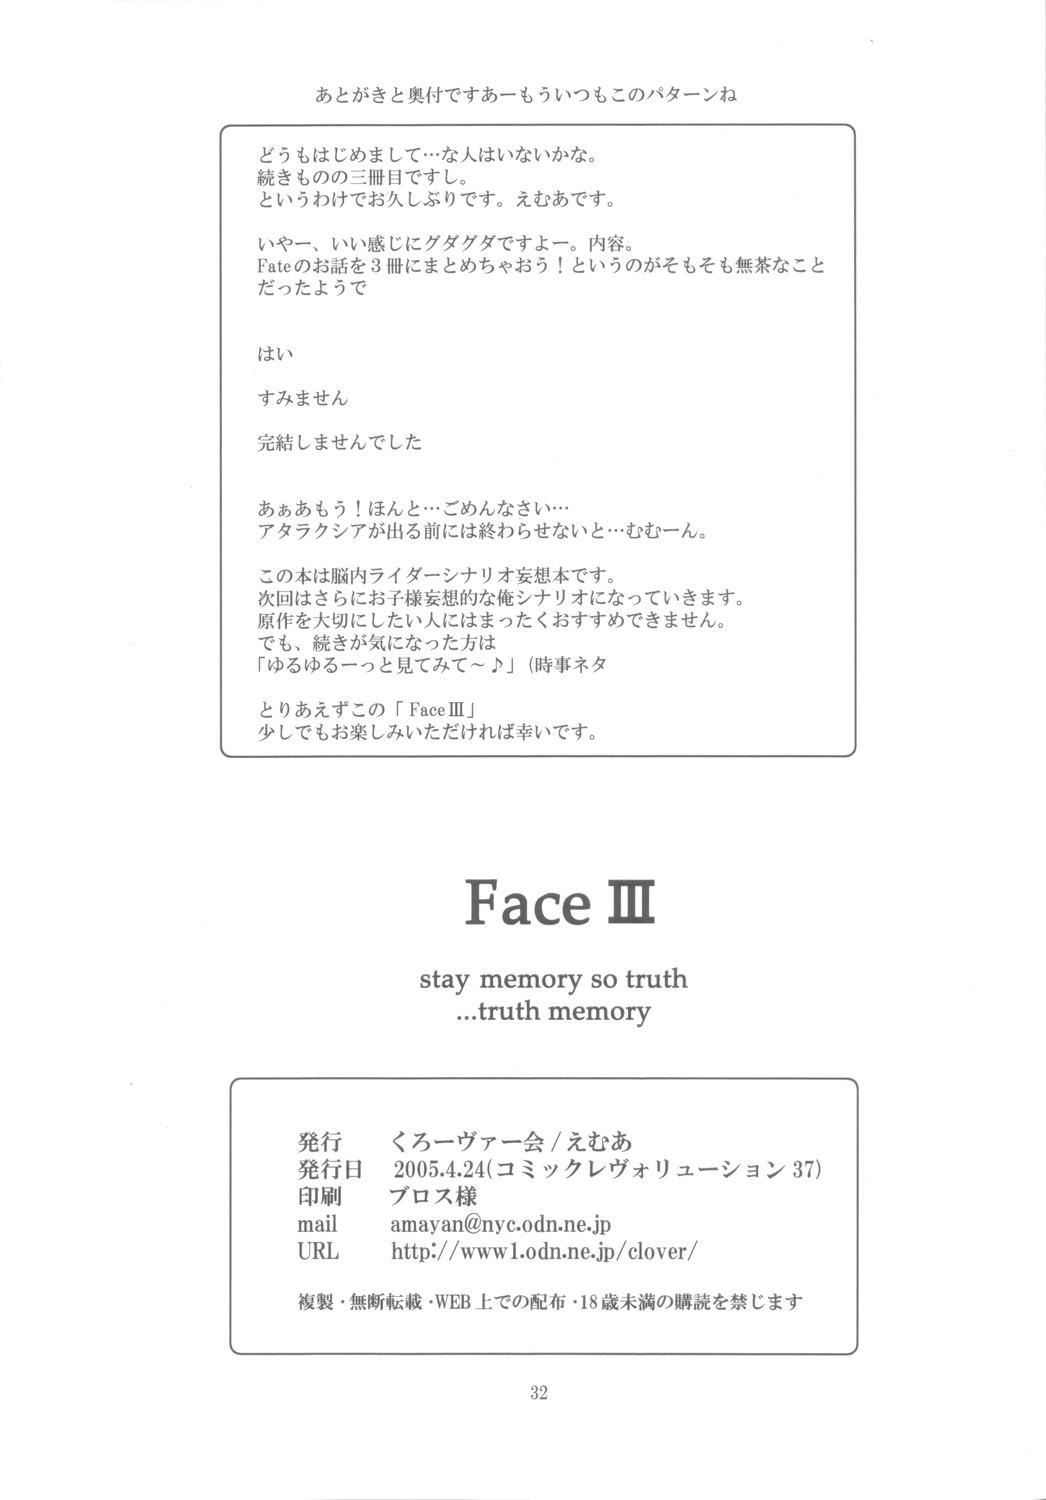 Face III stay memory so truth 30